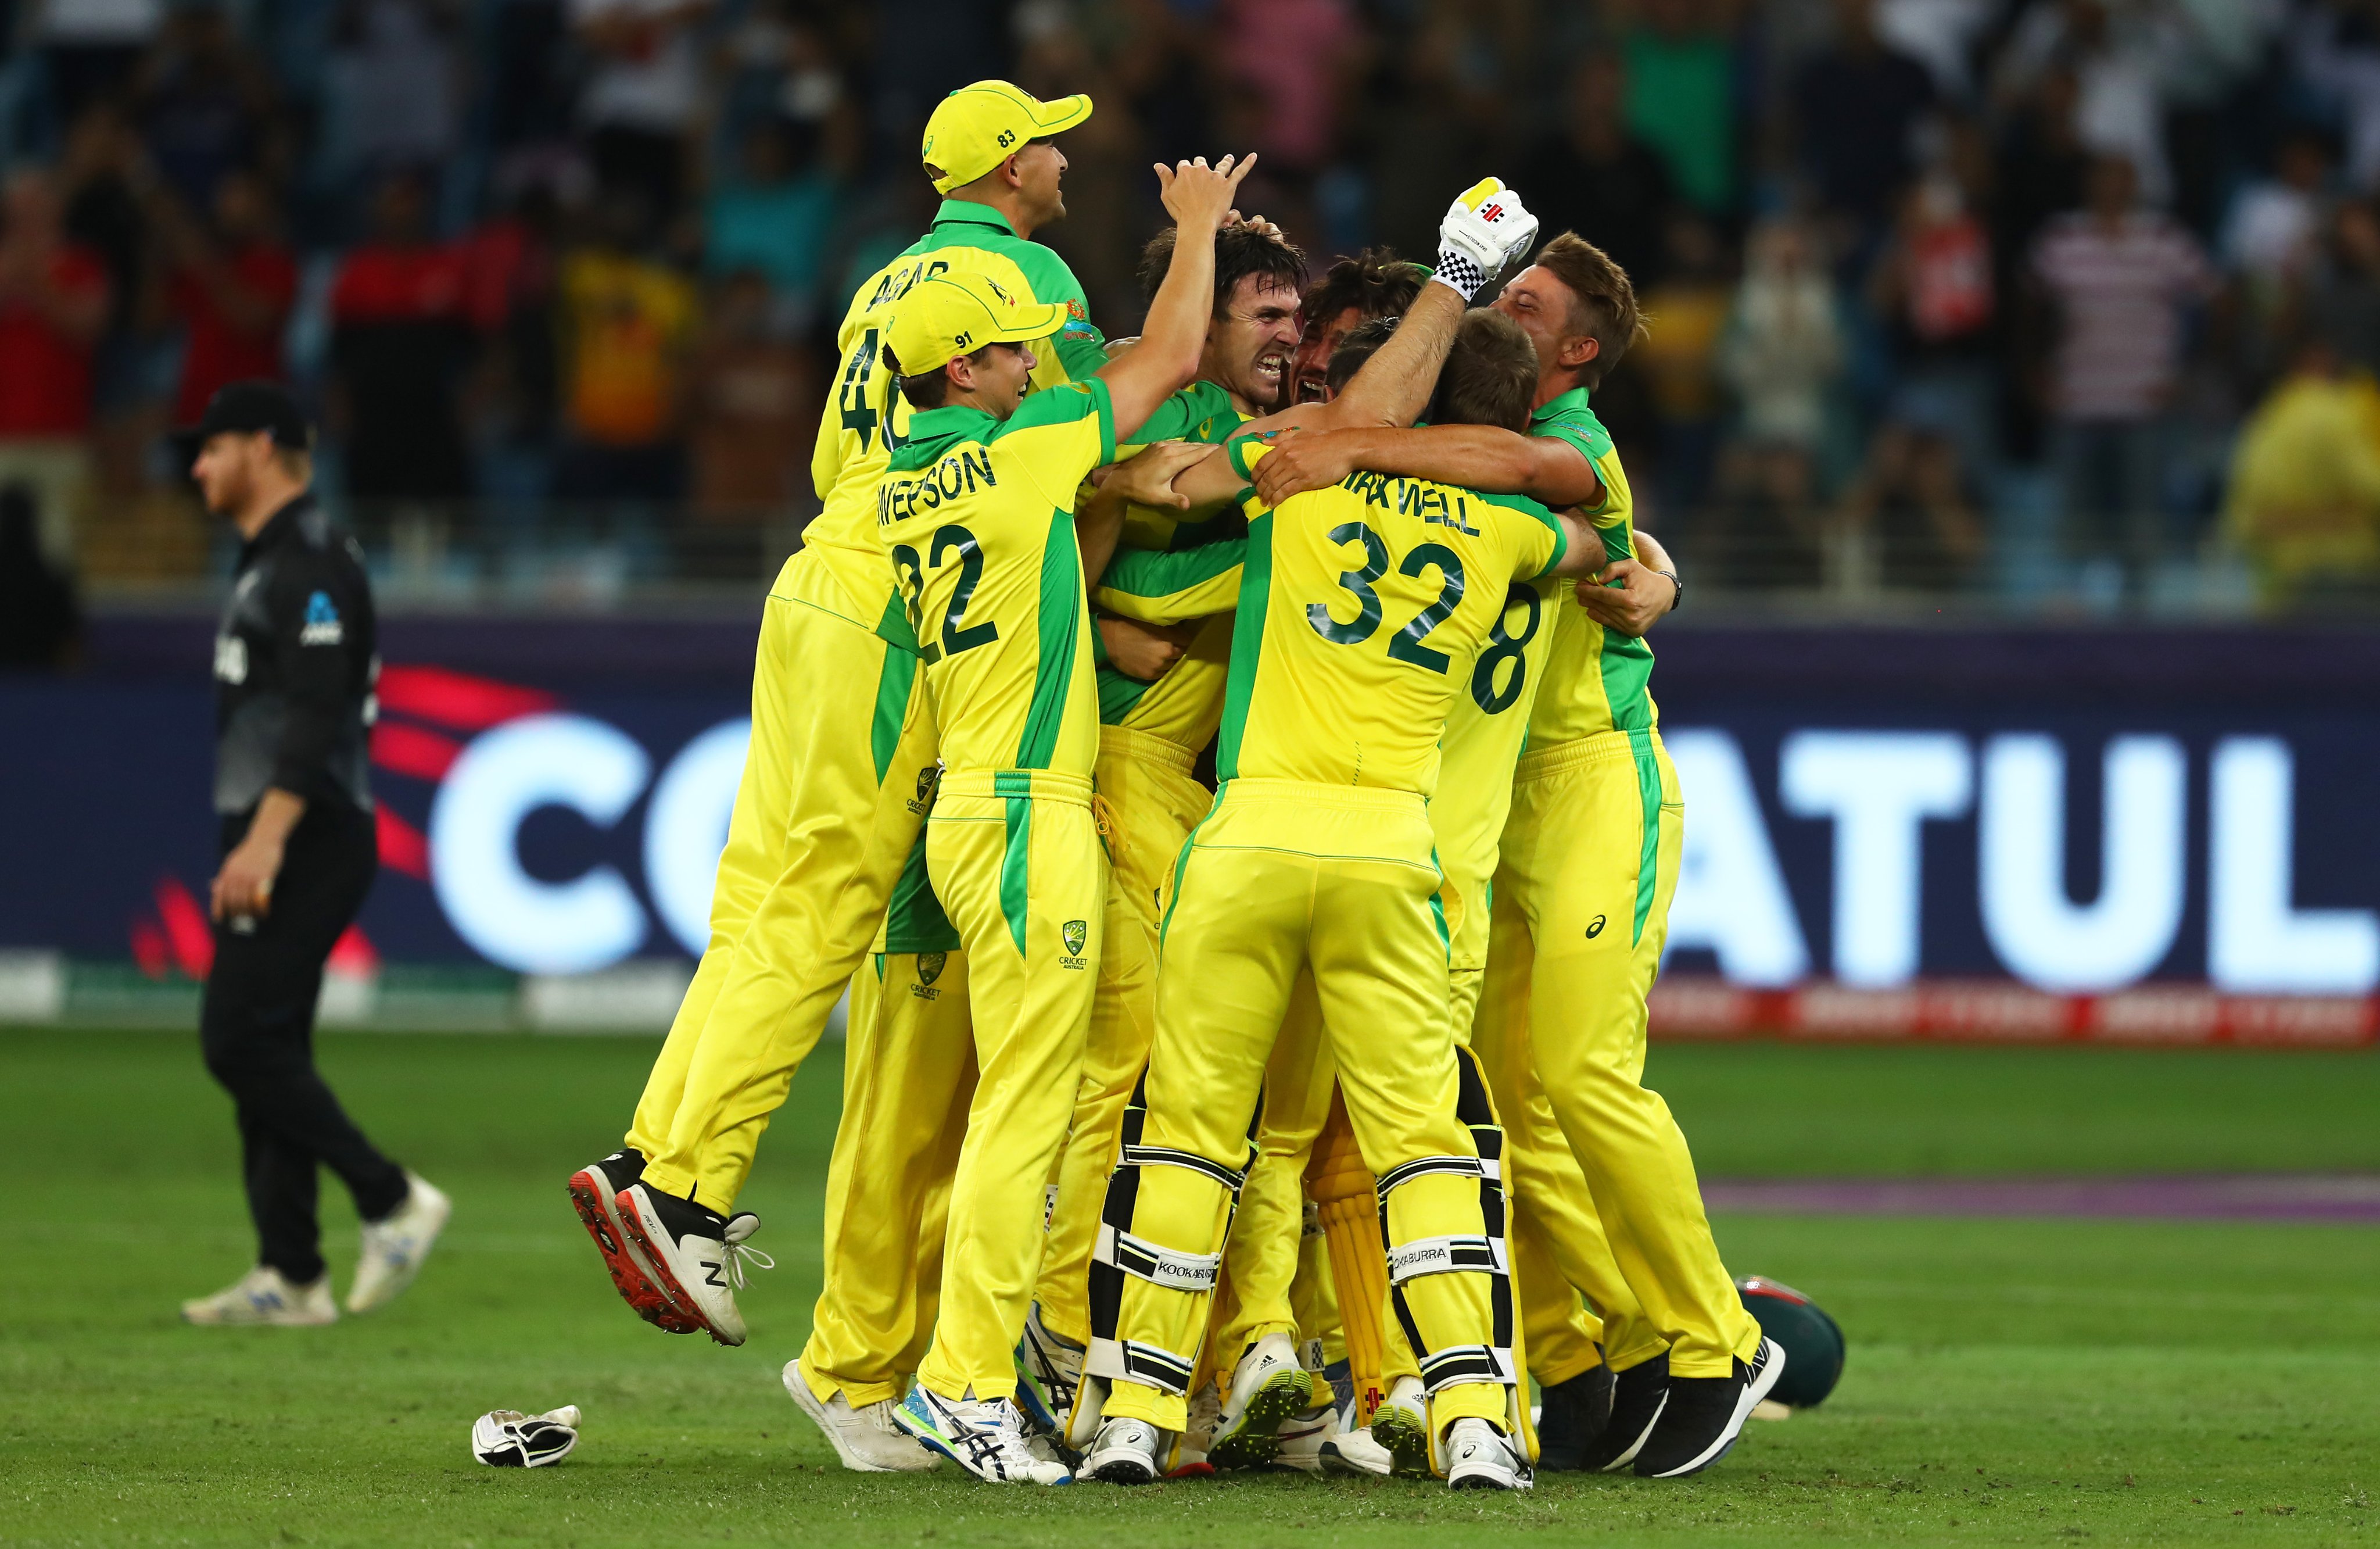 T20 World Cup 2021 Final | Twitter reacts as Mitchell Marsh, David Warner lead Australia to maiden T20 WC title